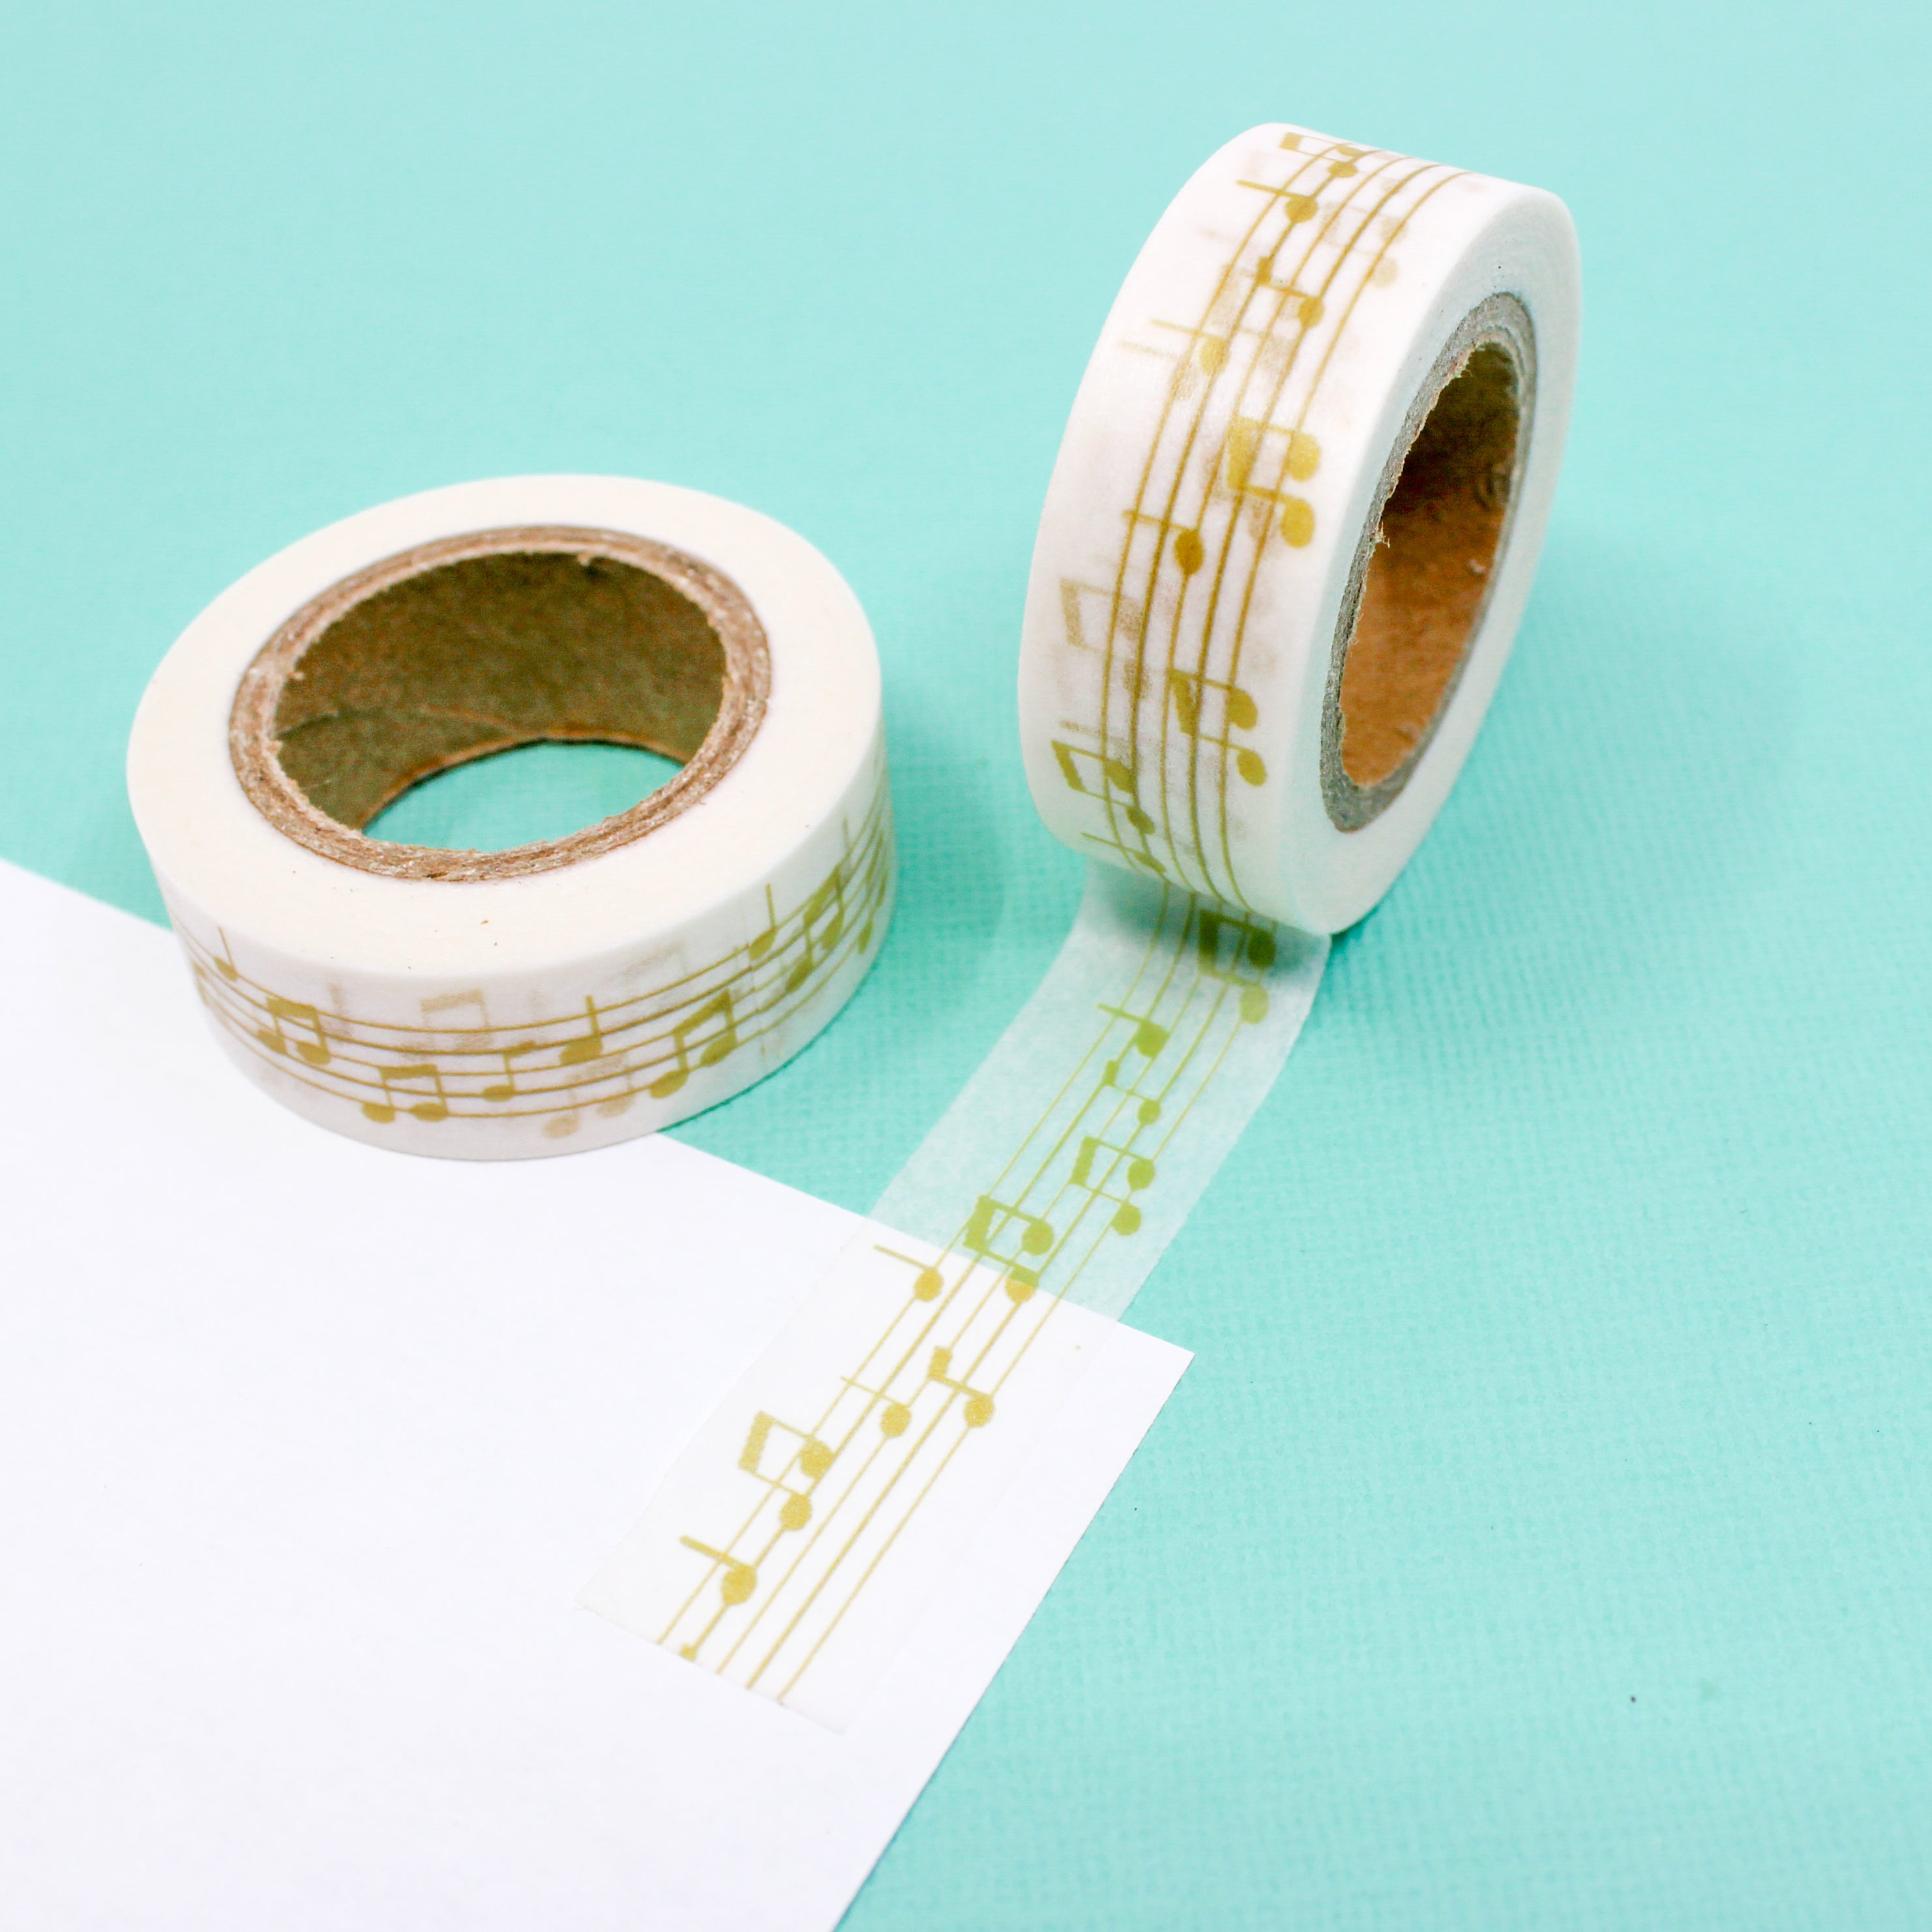 This is a yellow music notes pattern washi tape from BBB Supplies Craft Shop